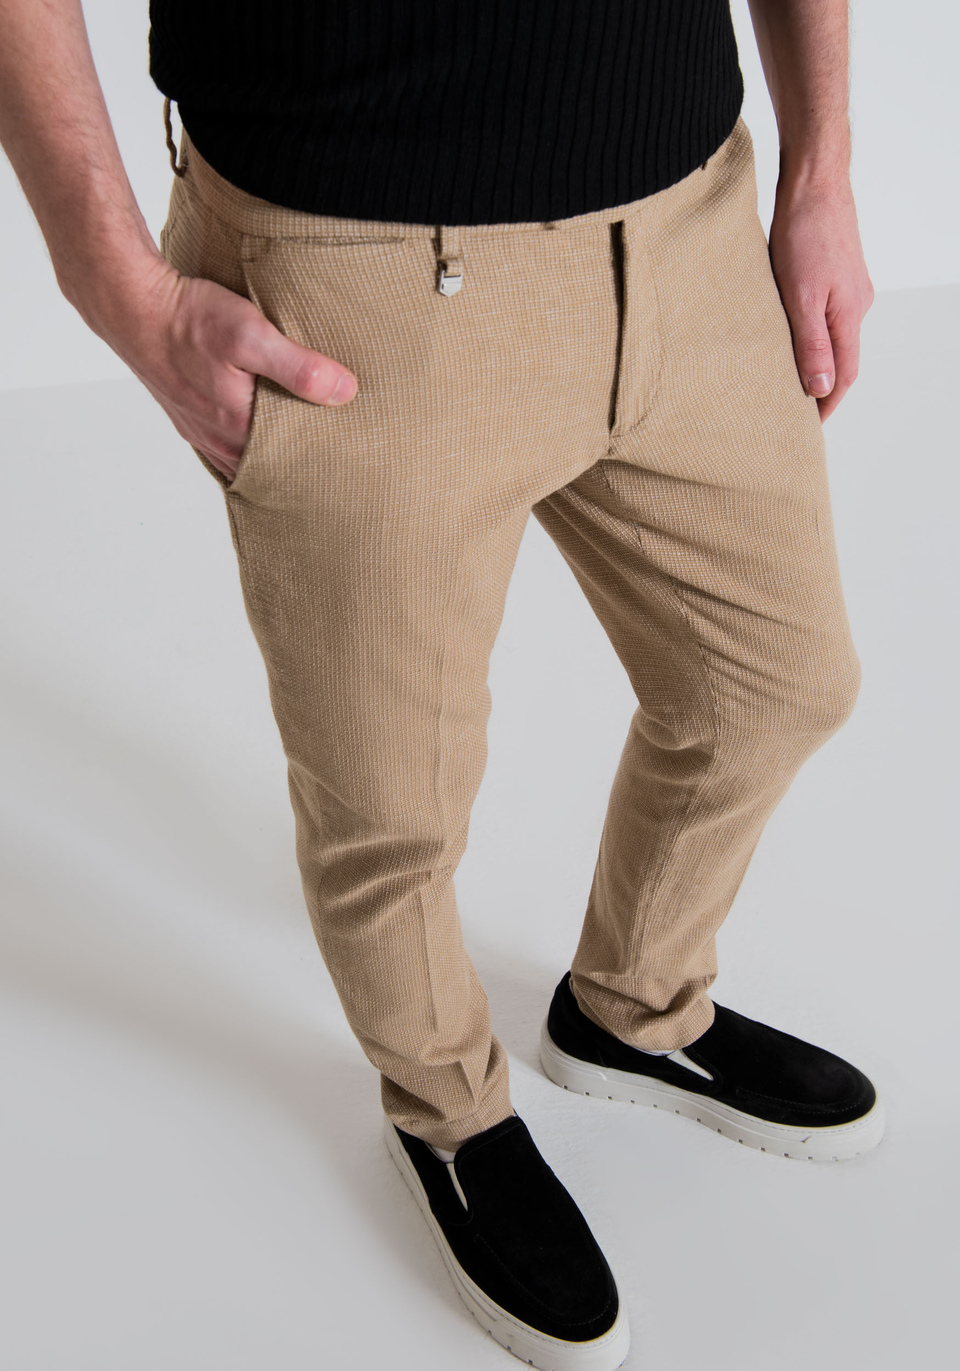 "BRYAN" SKINNY-FIT TROUSERS IN MICRO-WEAVE STRETCH LINEN BLEND - Antony Morato Online Shop